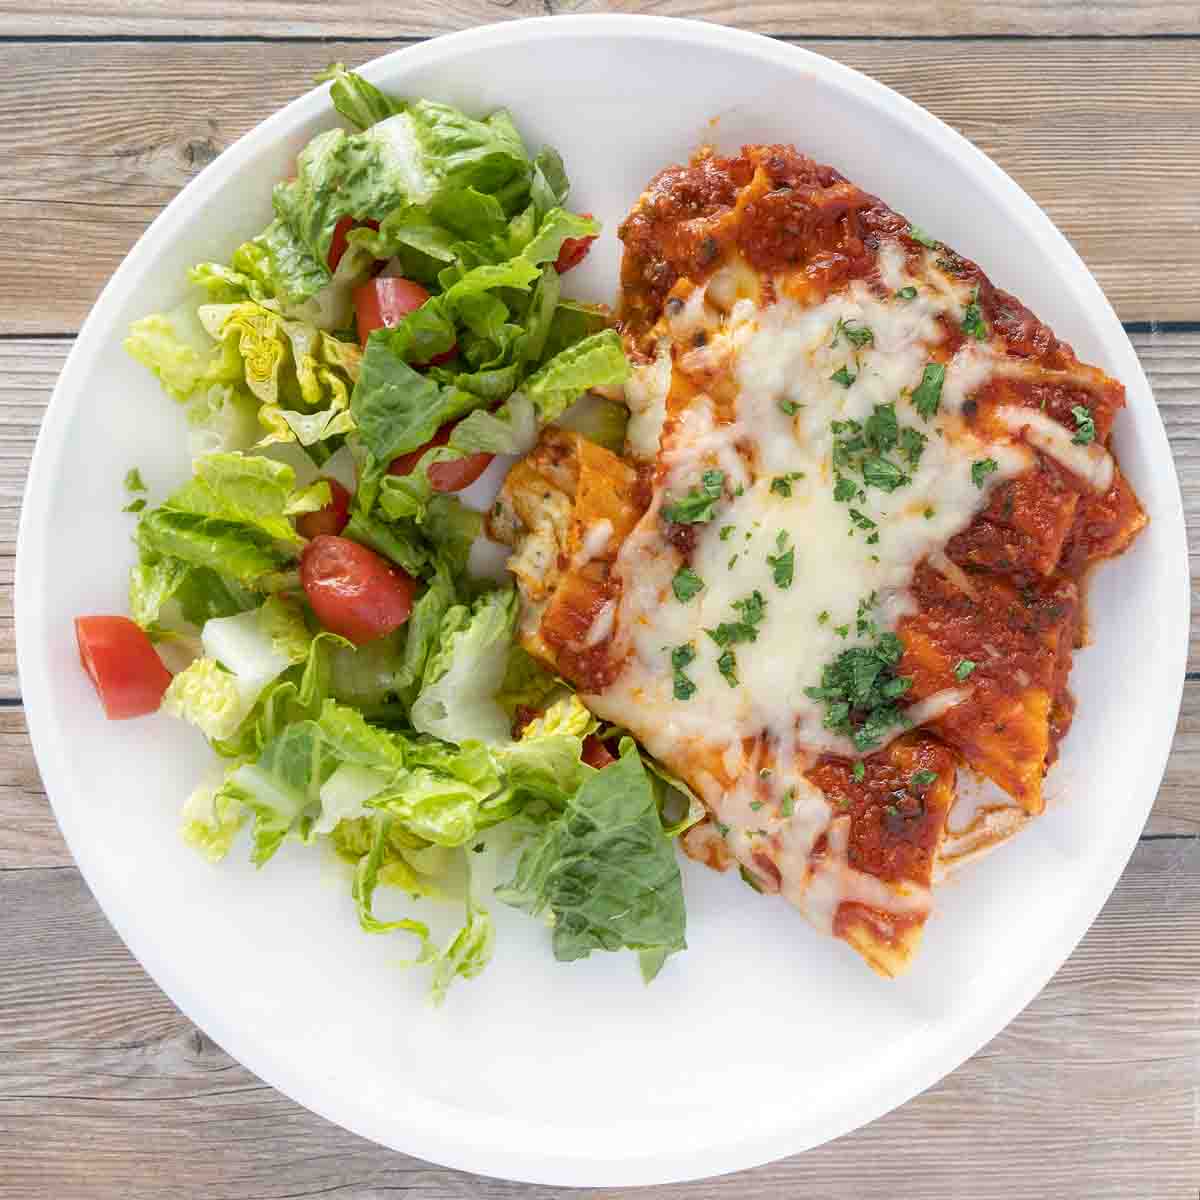 baked manicotti with side salad on a white plate.